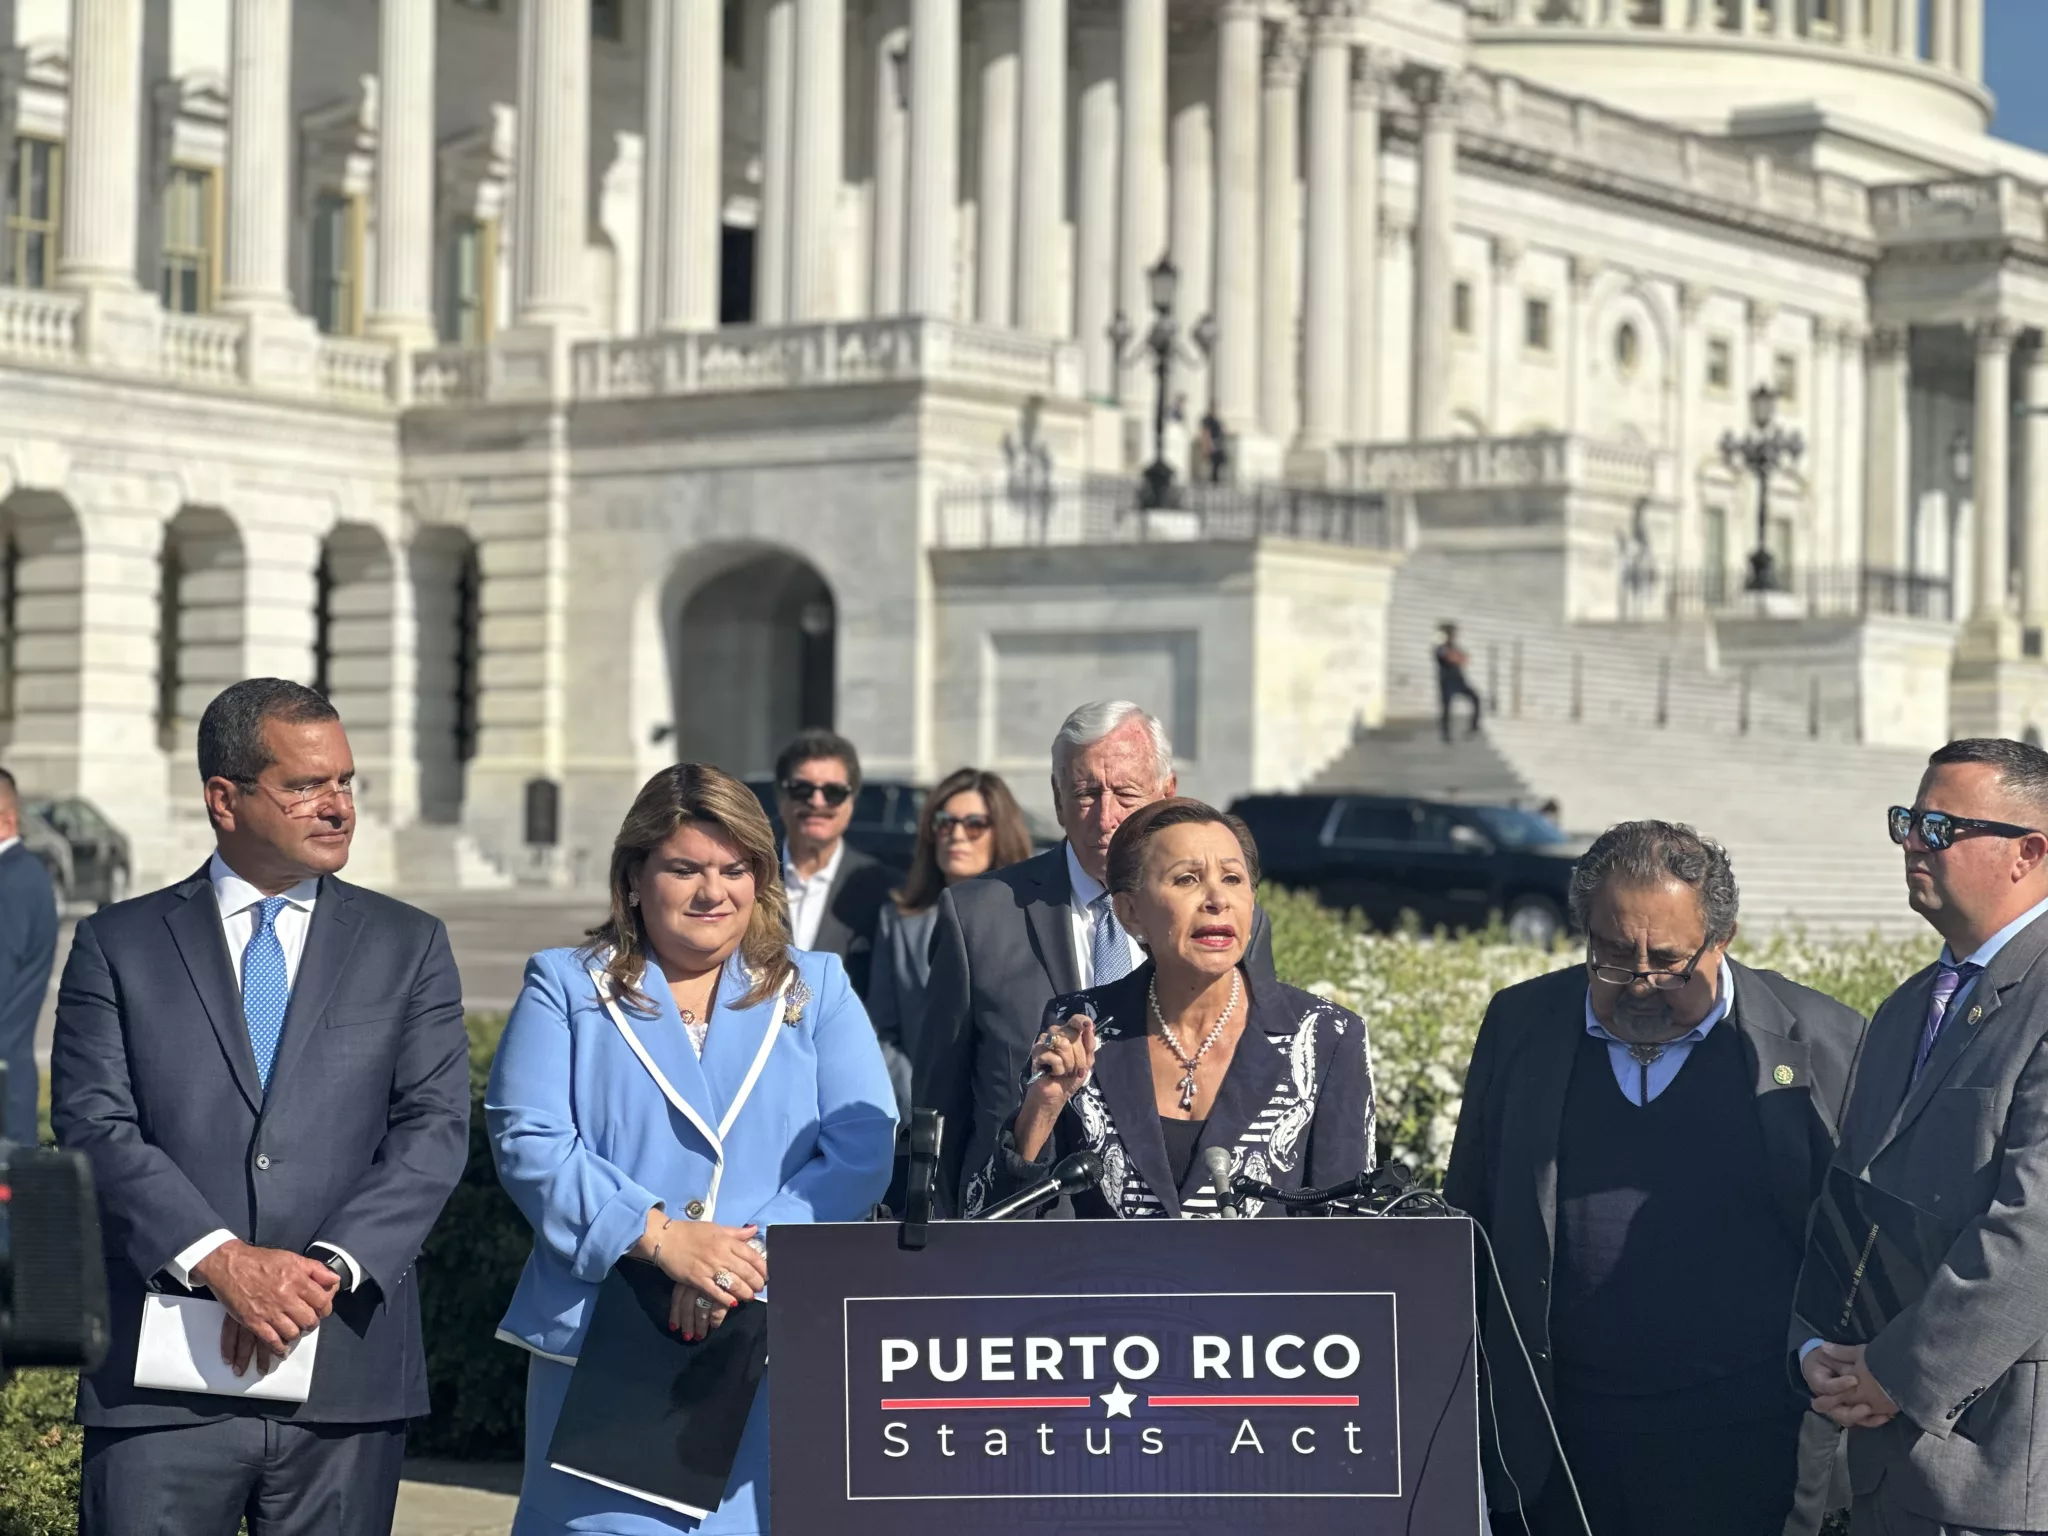 Puerto Rico Status Act reintroduced in the US House of Representatives